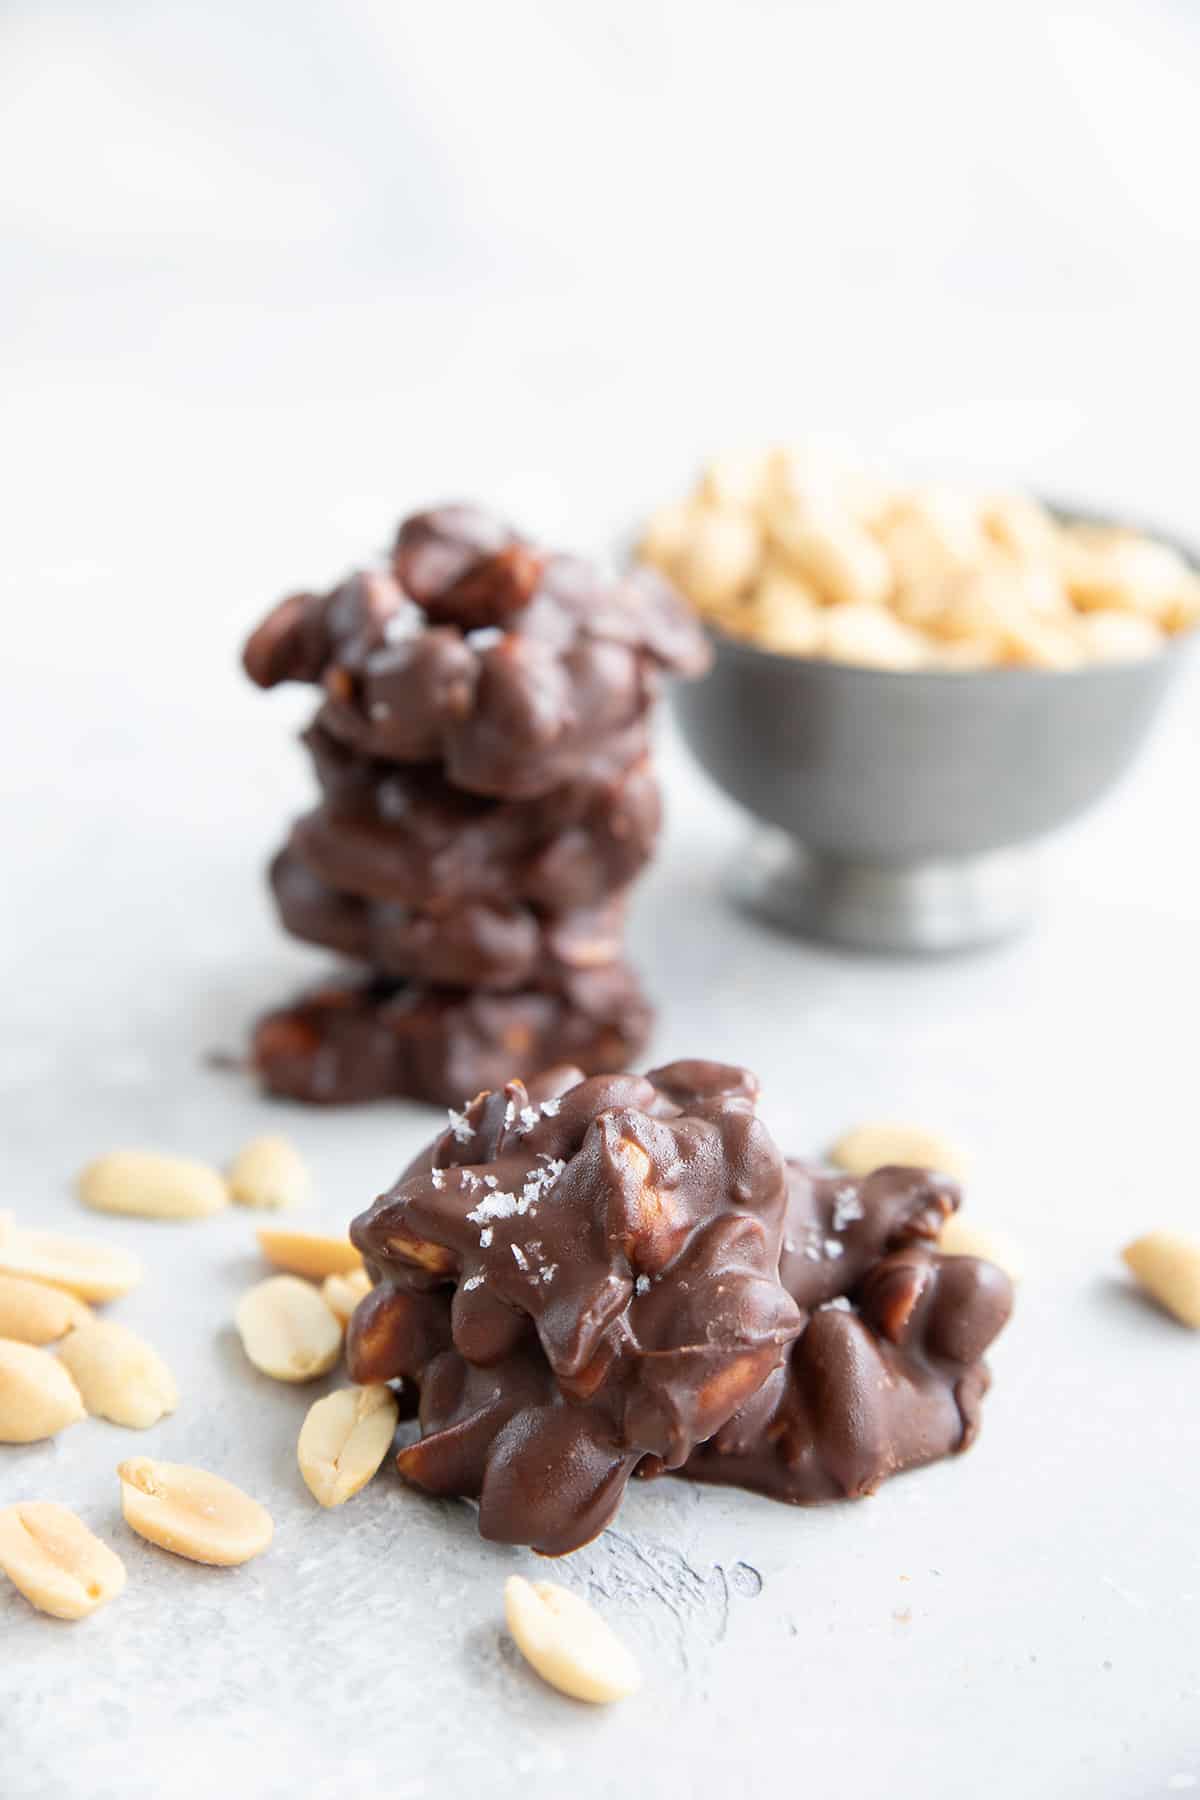 Two Keto Peanut Clusters in front of a stack of more clusters.